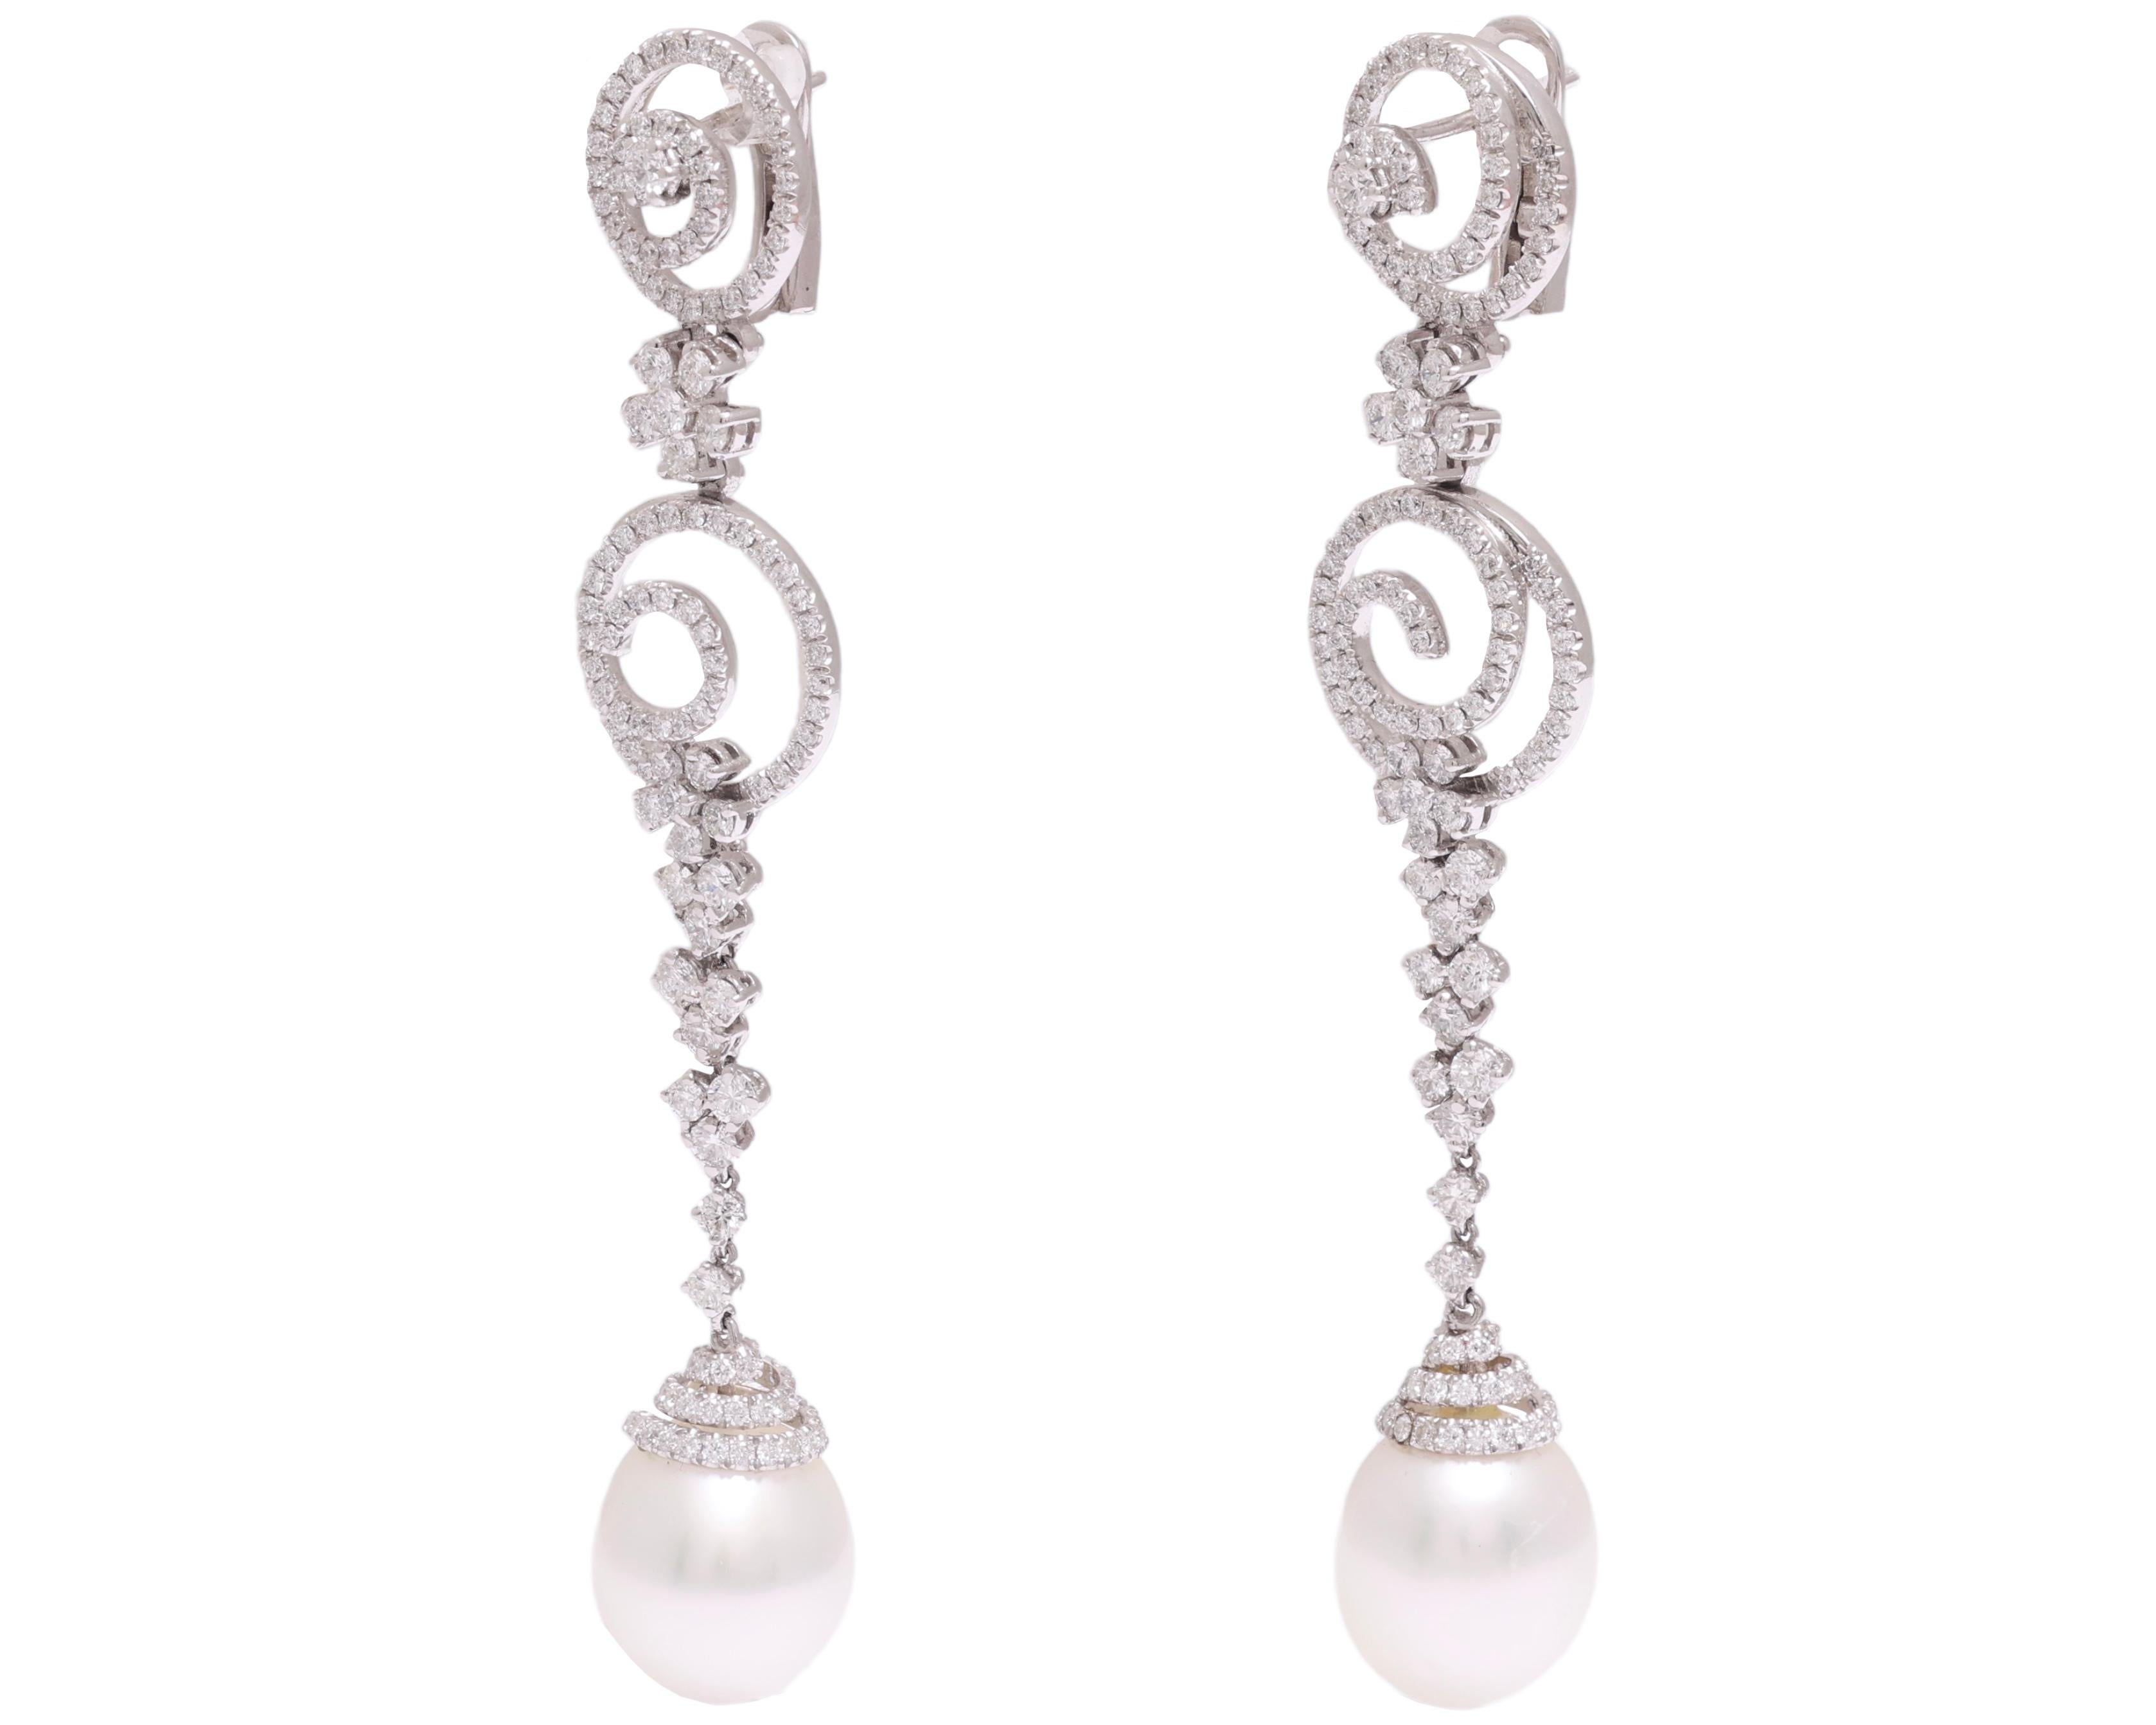 Artisan 18kt White Gold Earrings 5.10 Ct Diamonds & Pearls, Possible Matching Pendant For Sale